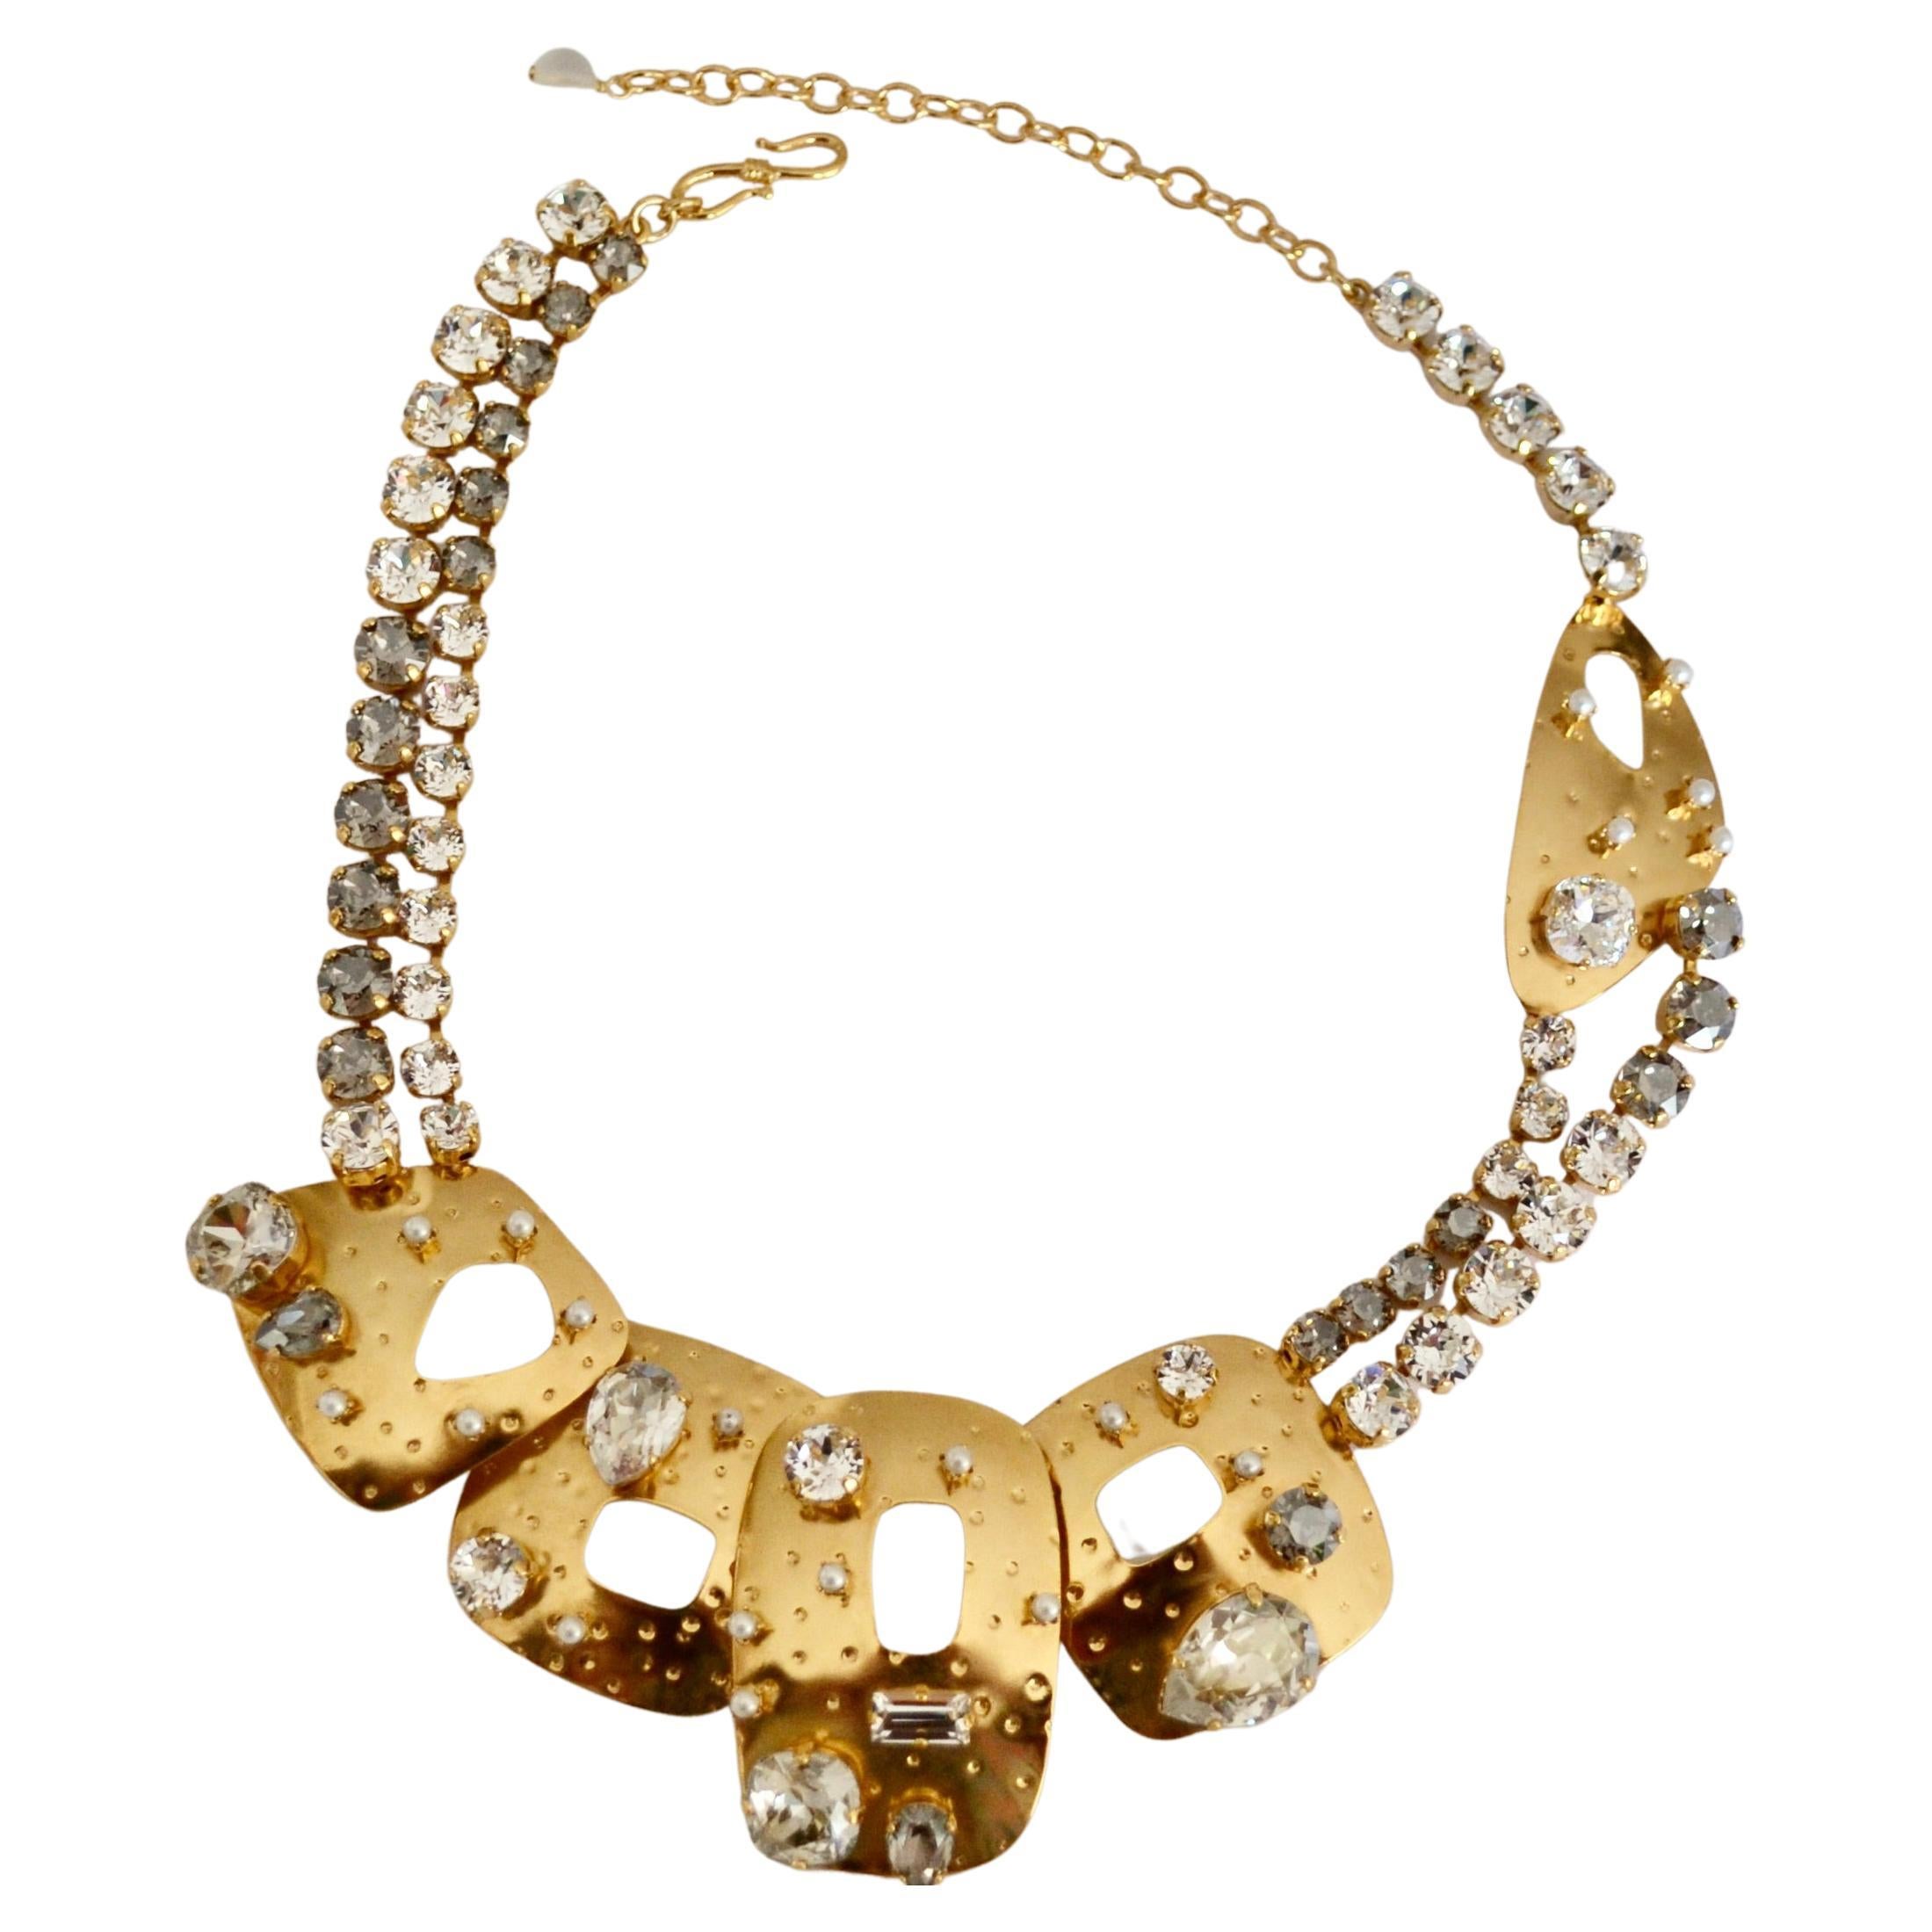 Philippe Ferrandis Barbados White, Clear and Gold Choker